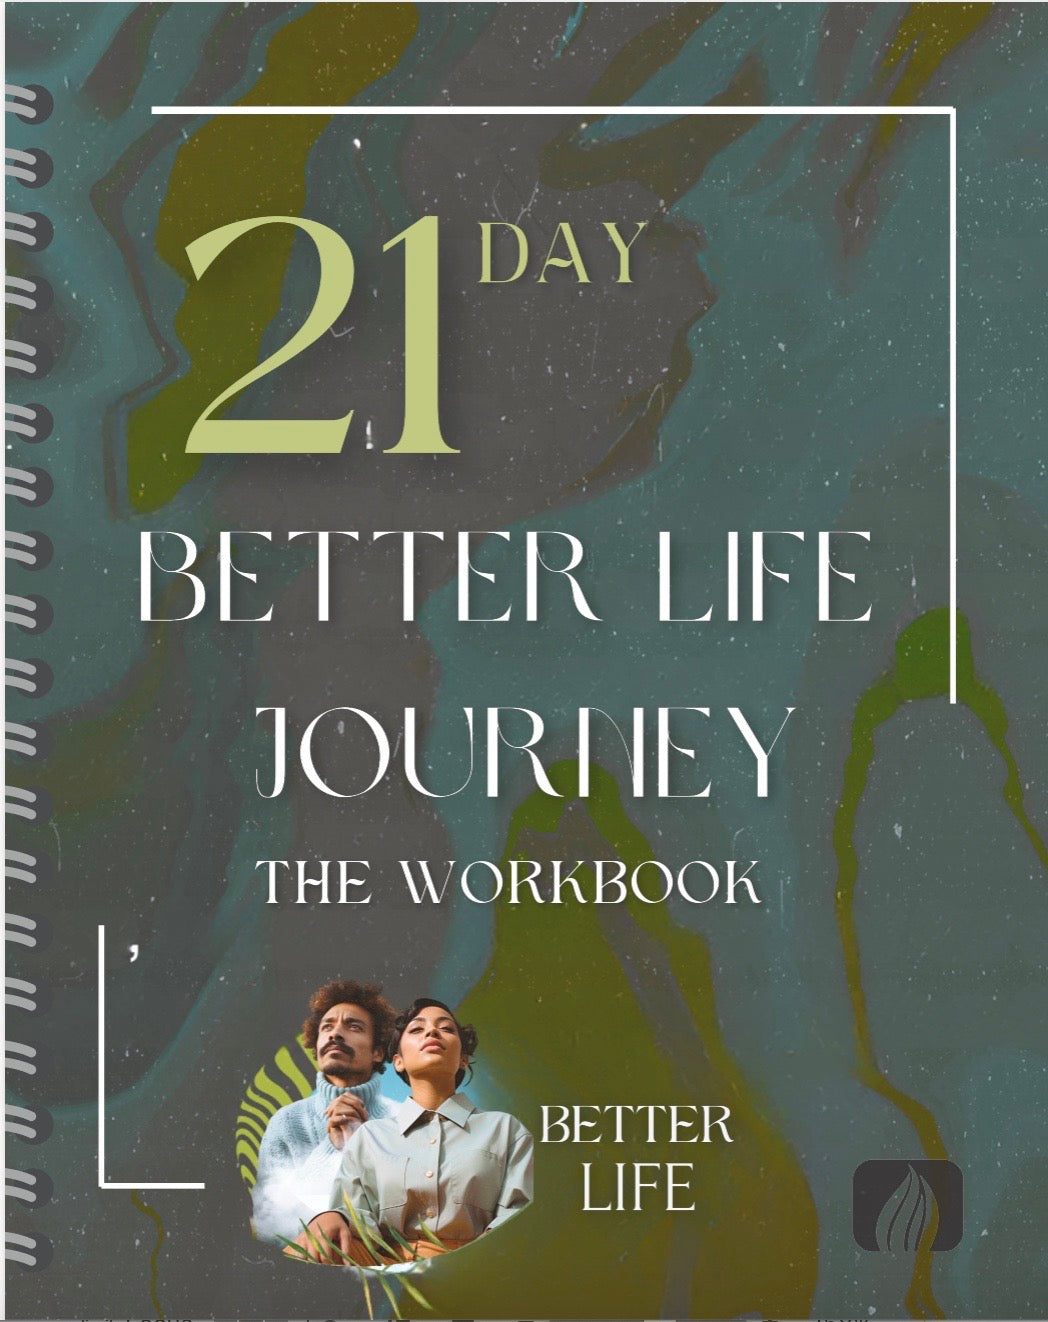 21 Day Better Life Journey - The Workbook